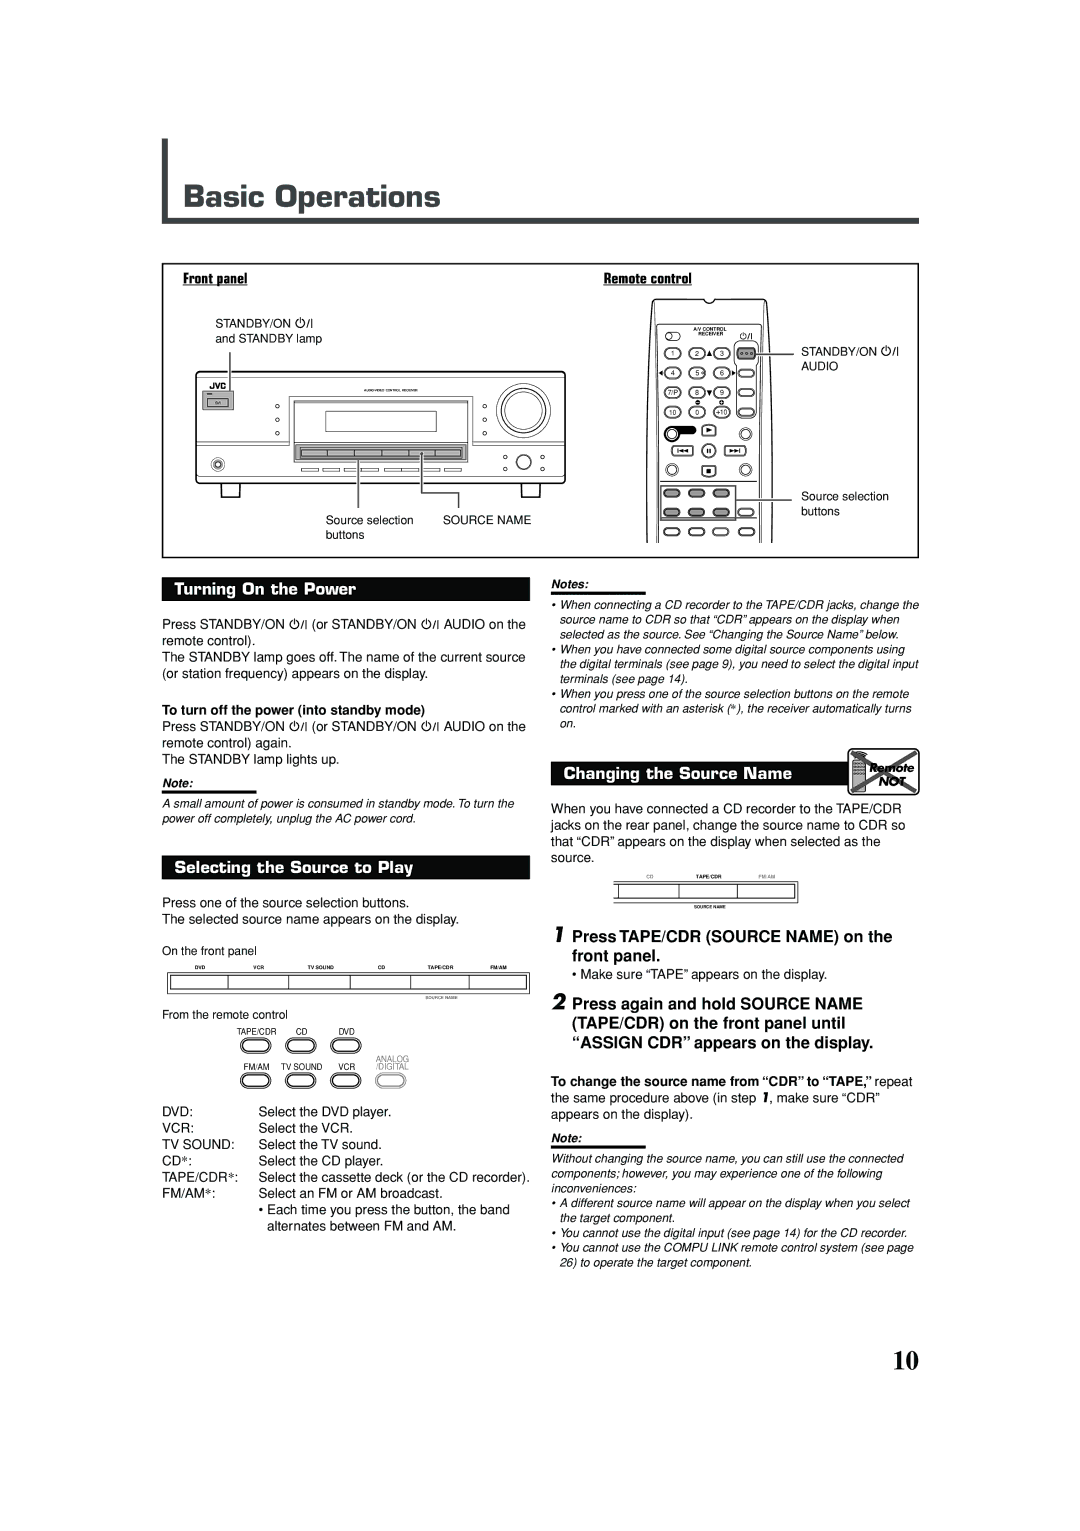 JVC RX-5030VBK manual Basic Operations, Turning On the Power, Selecting the Source to Play, Front panel Remote control 